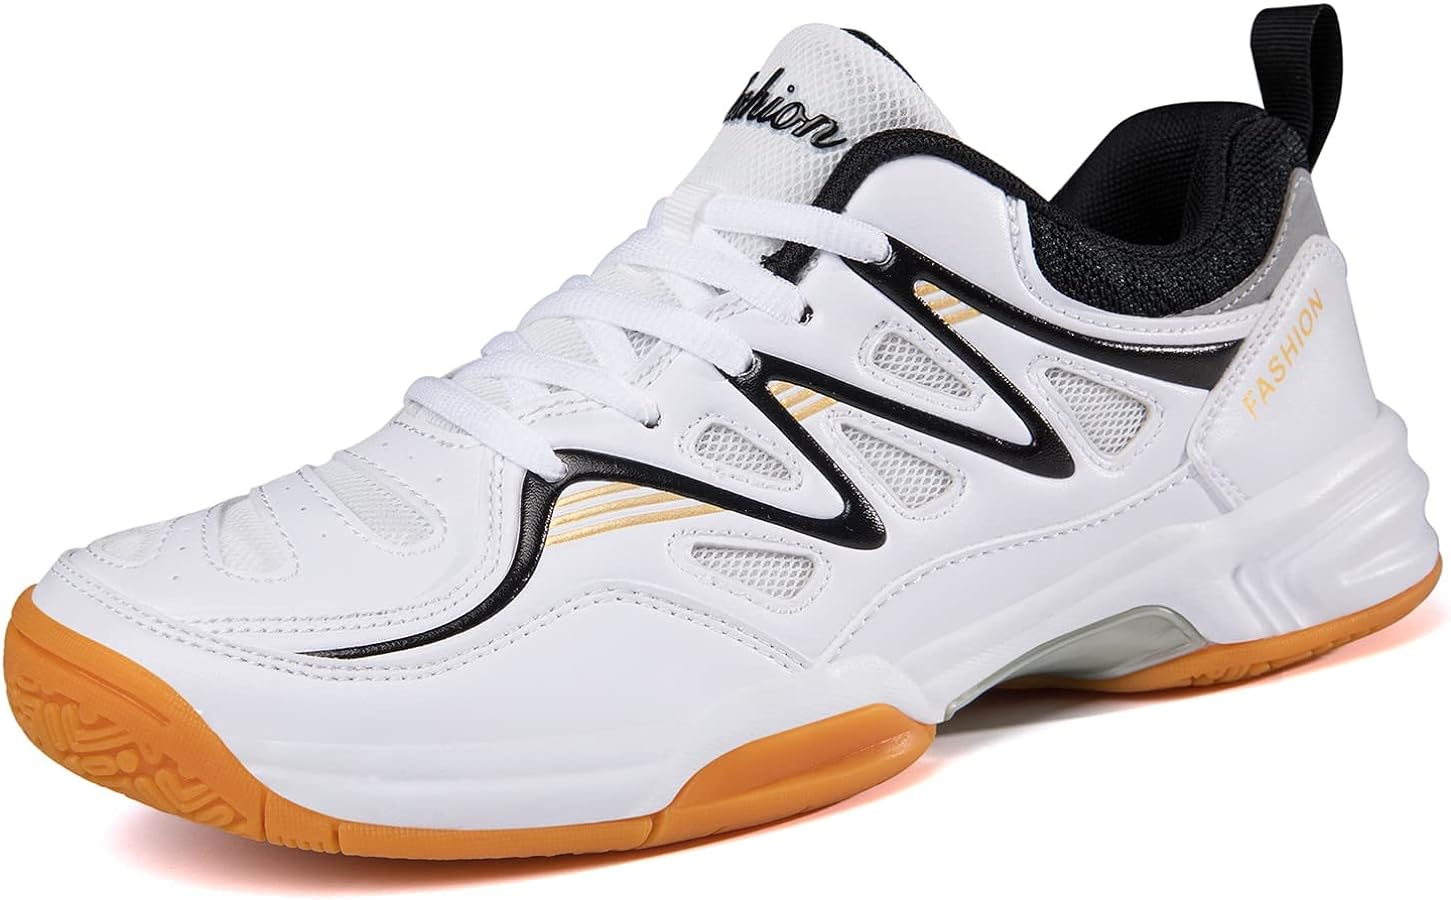 Can Volleyball Shoes Be Used for Pickleball?